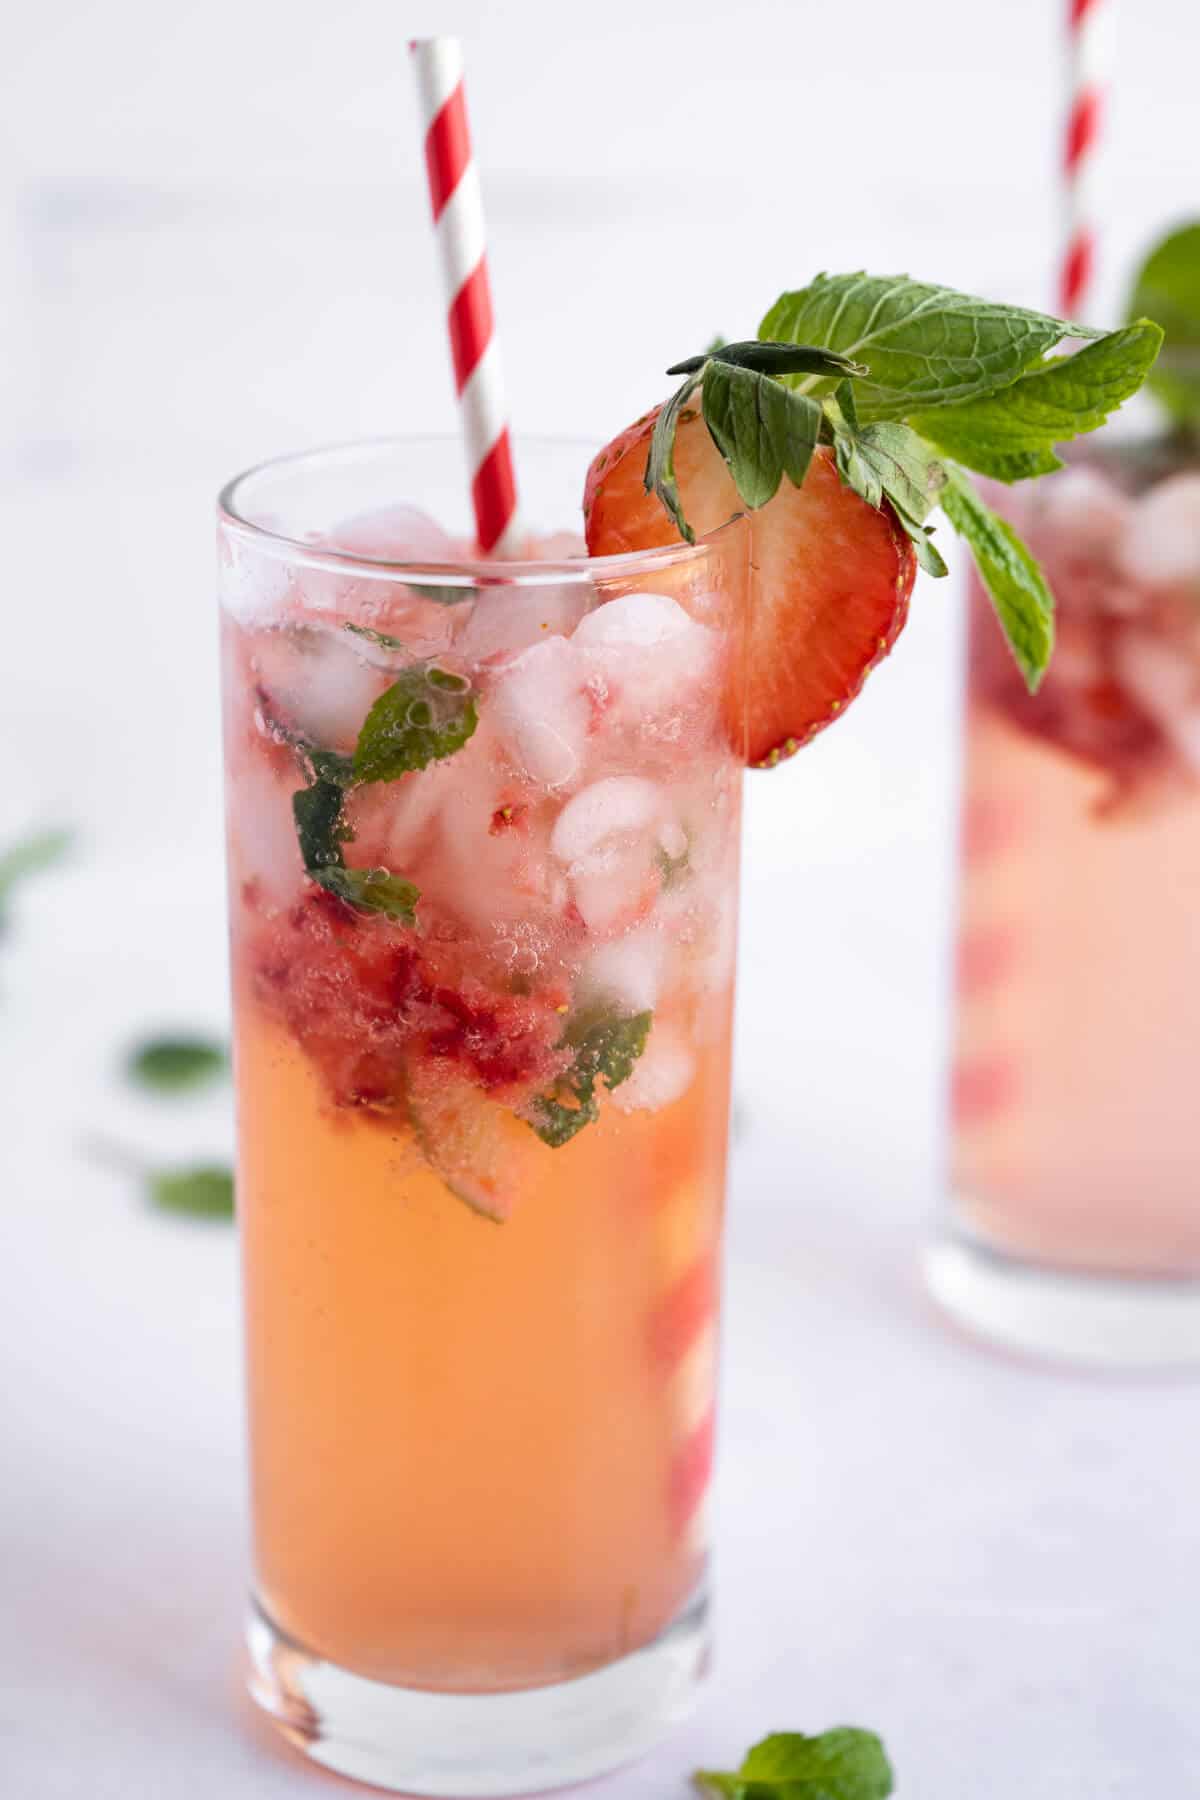 Strawberry Mojito Mocktail in a tall clear glass. Muddled strawberries and mint are visible, drink is finished with a sliced strawberry, fresh mint, and a red and white striped straw.